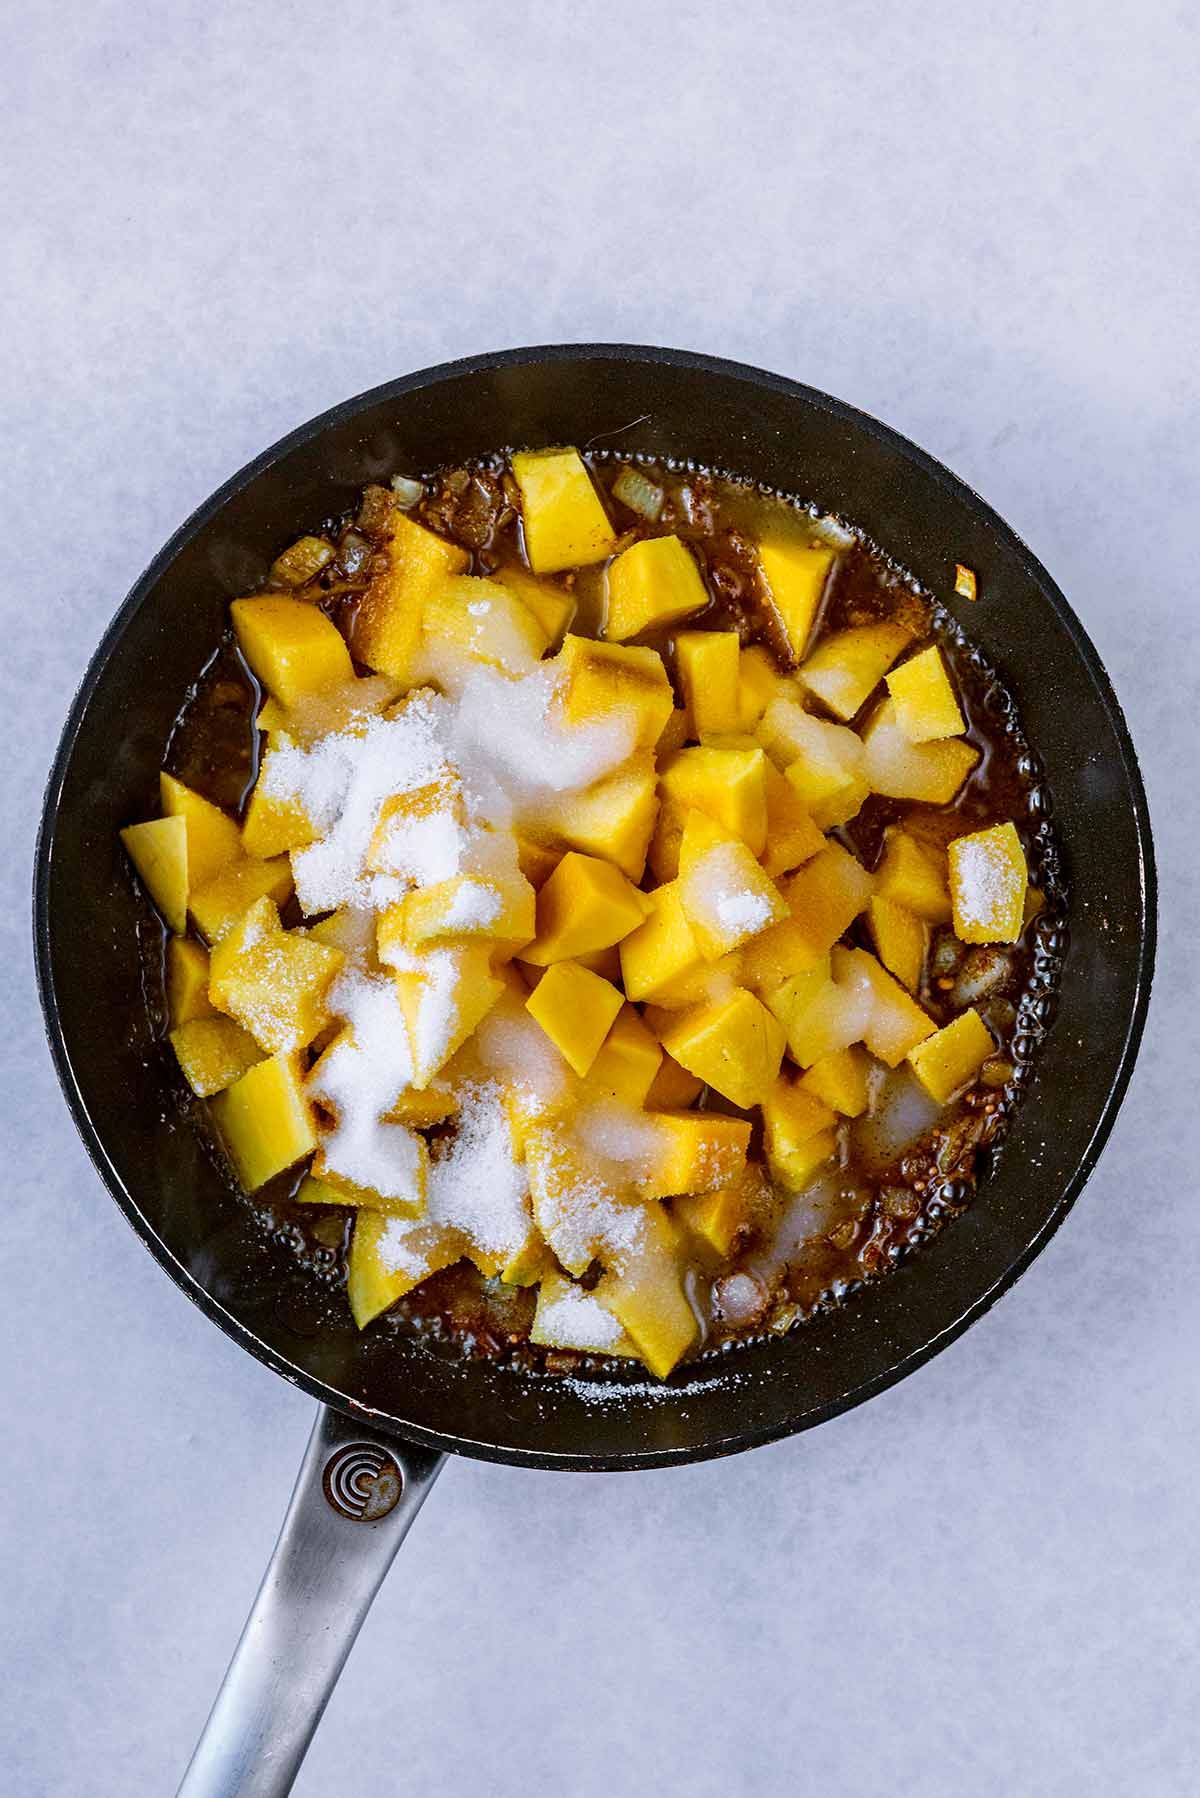 Chopped mango, sugar and vinegar added to the pan.